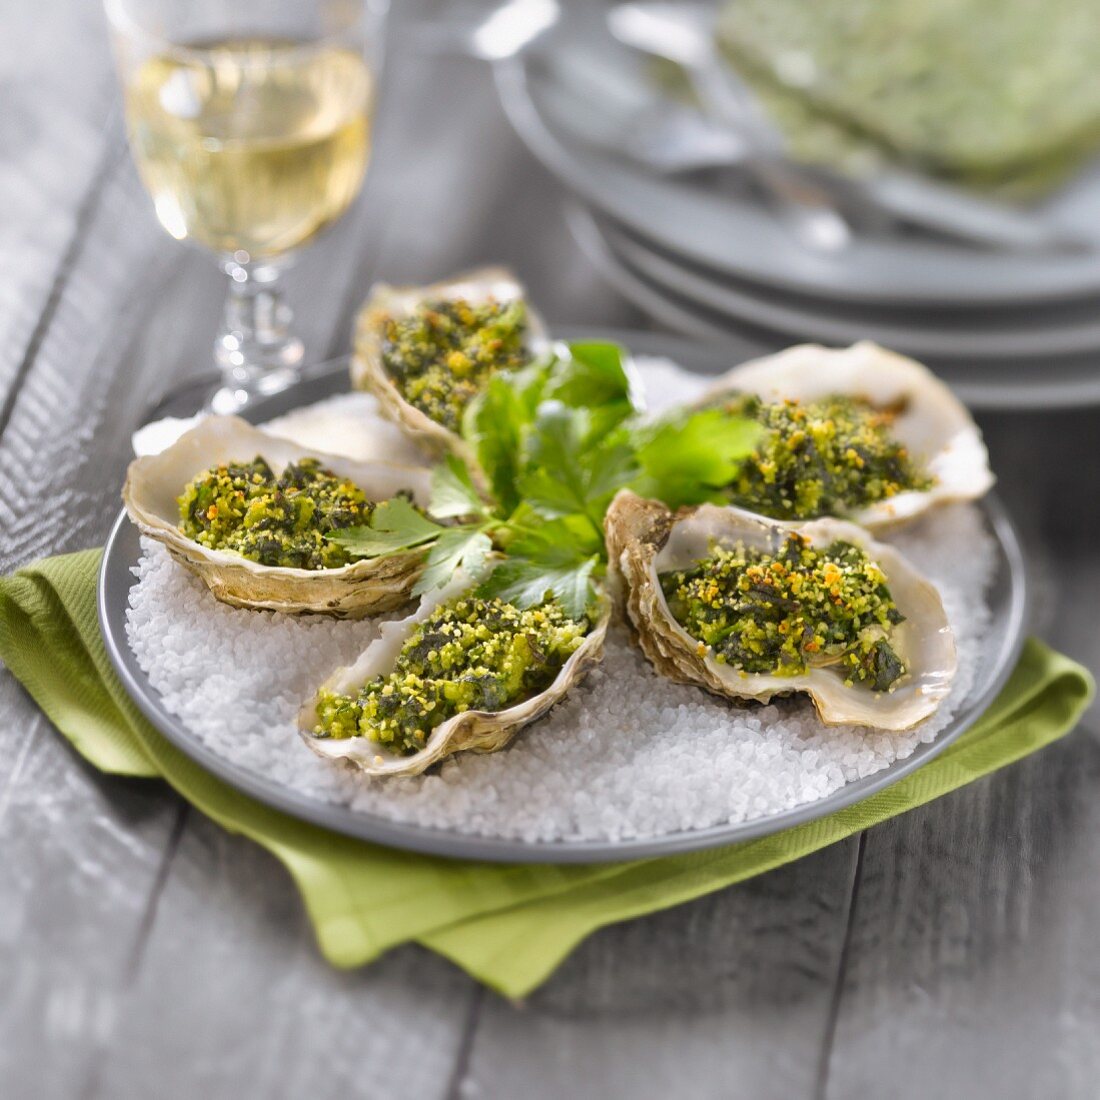 Hot oysters with spinach, parsley and breadcrumbs